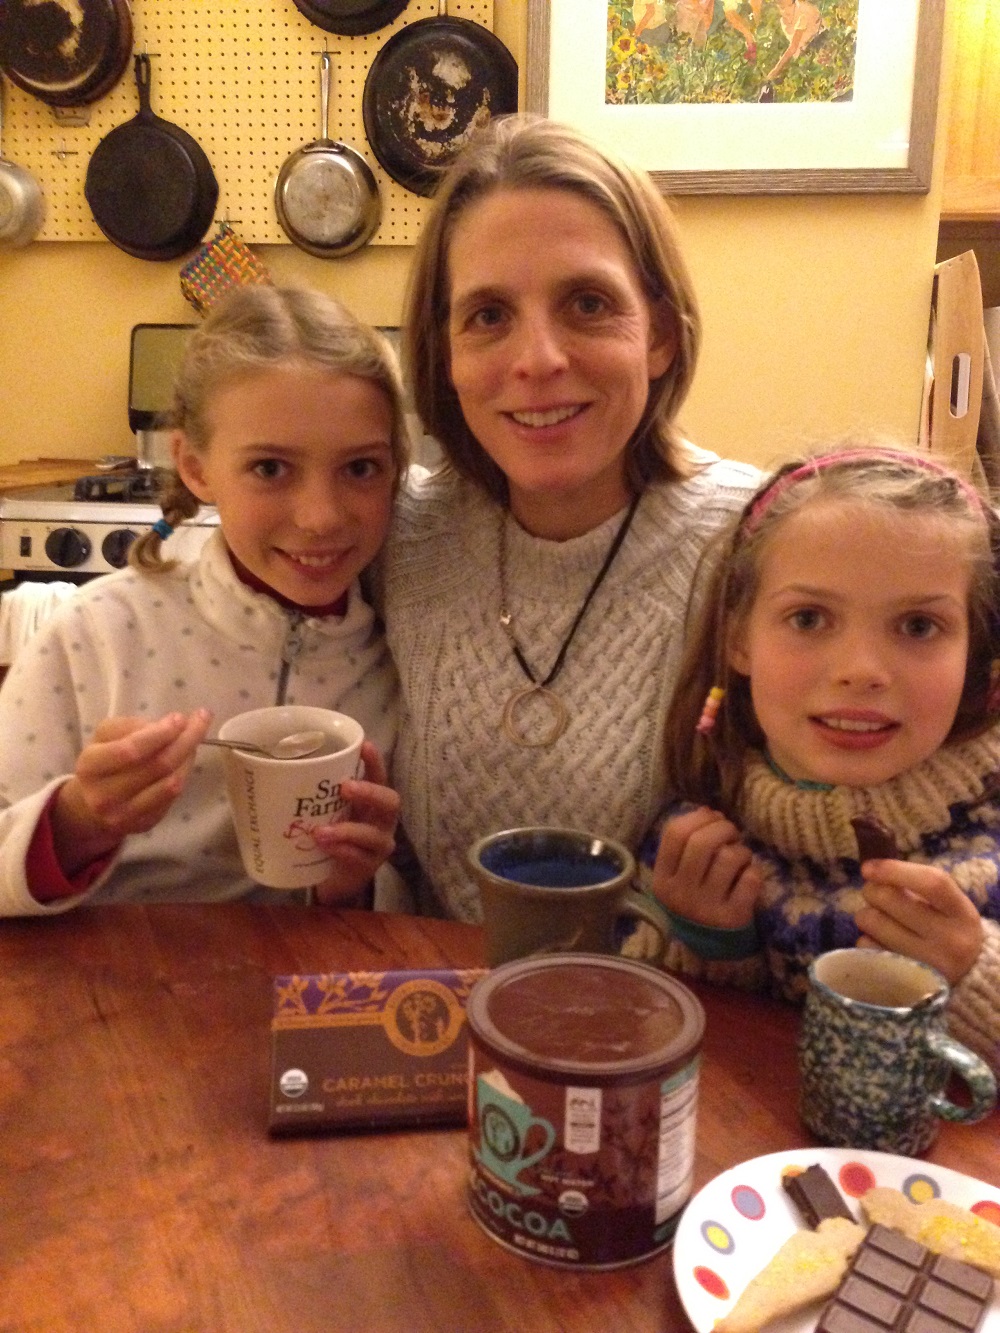 Virginia, with her daughters, shares tips for school fundraising